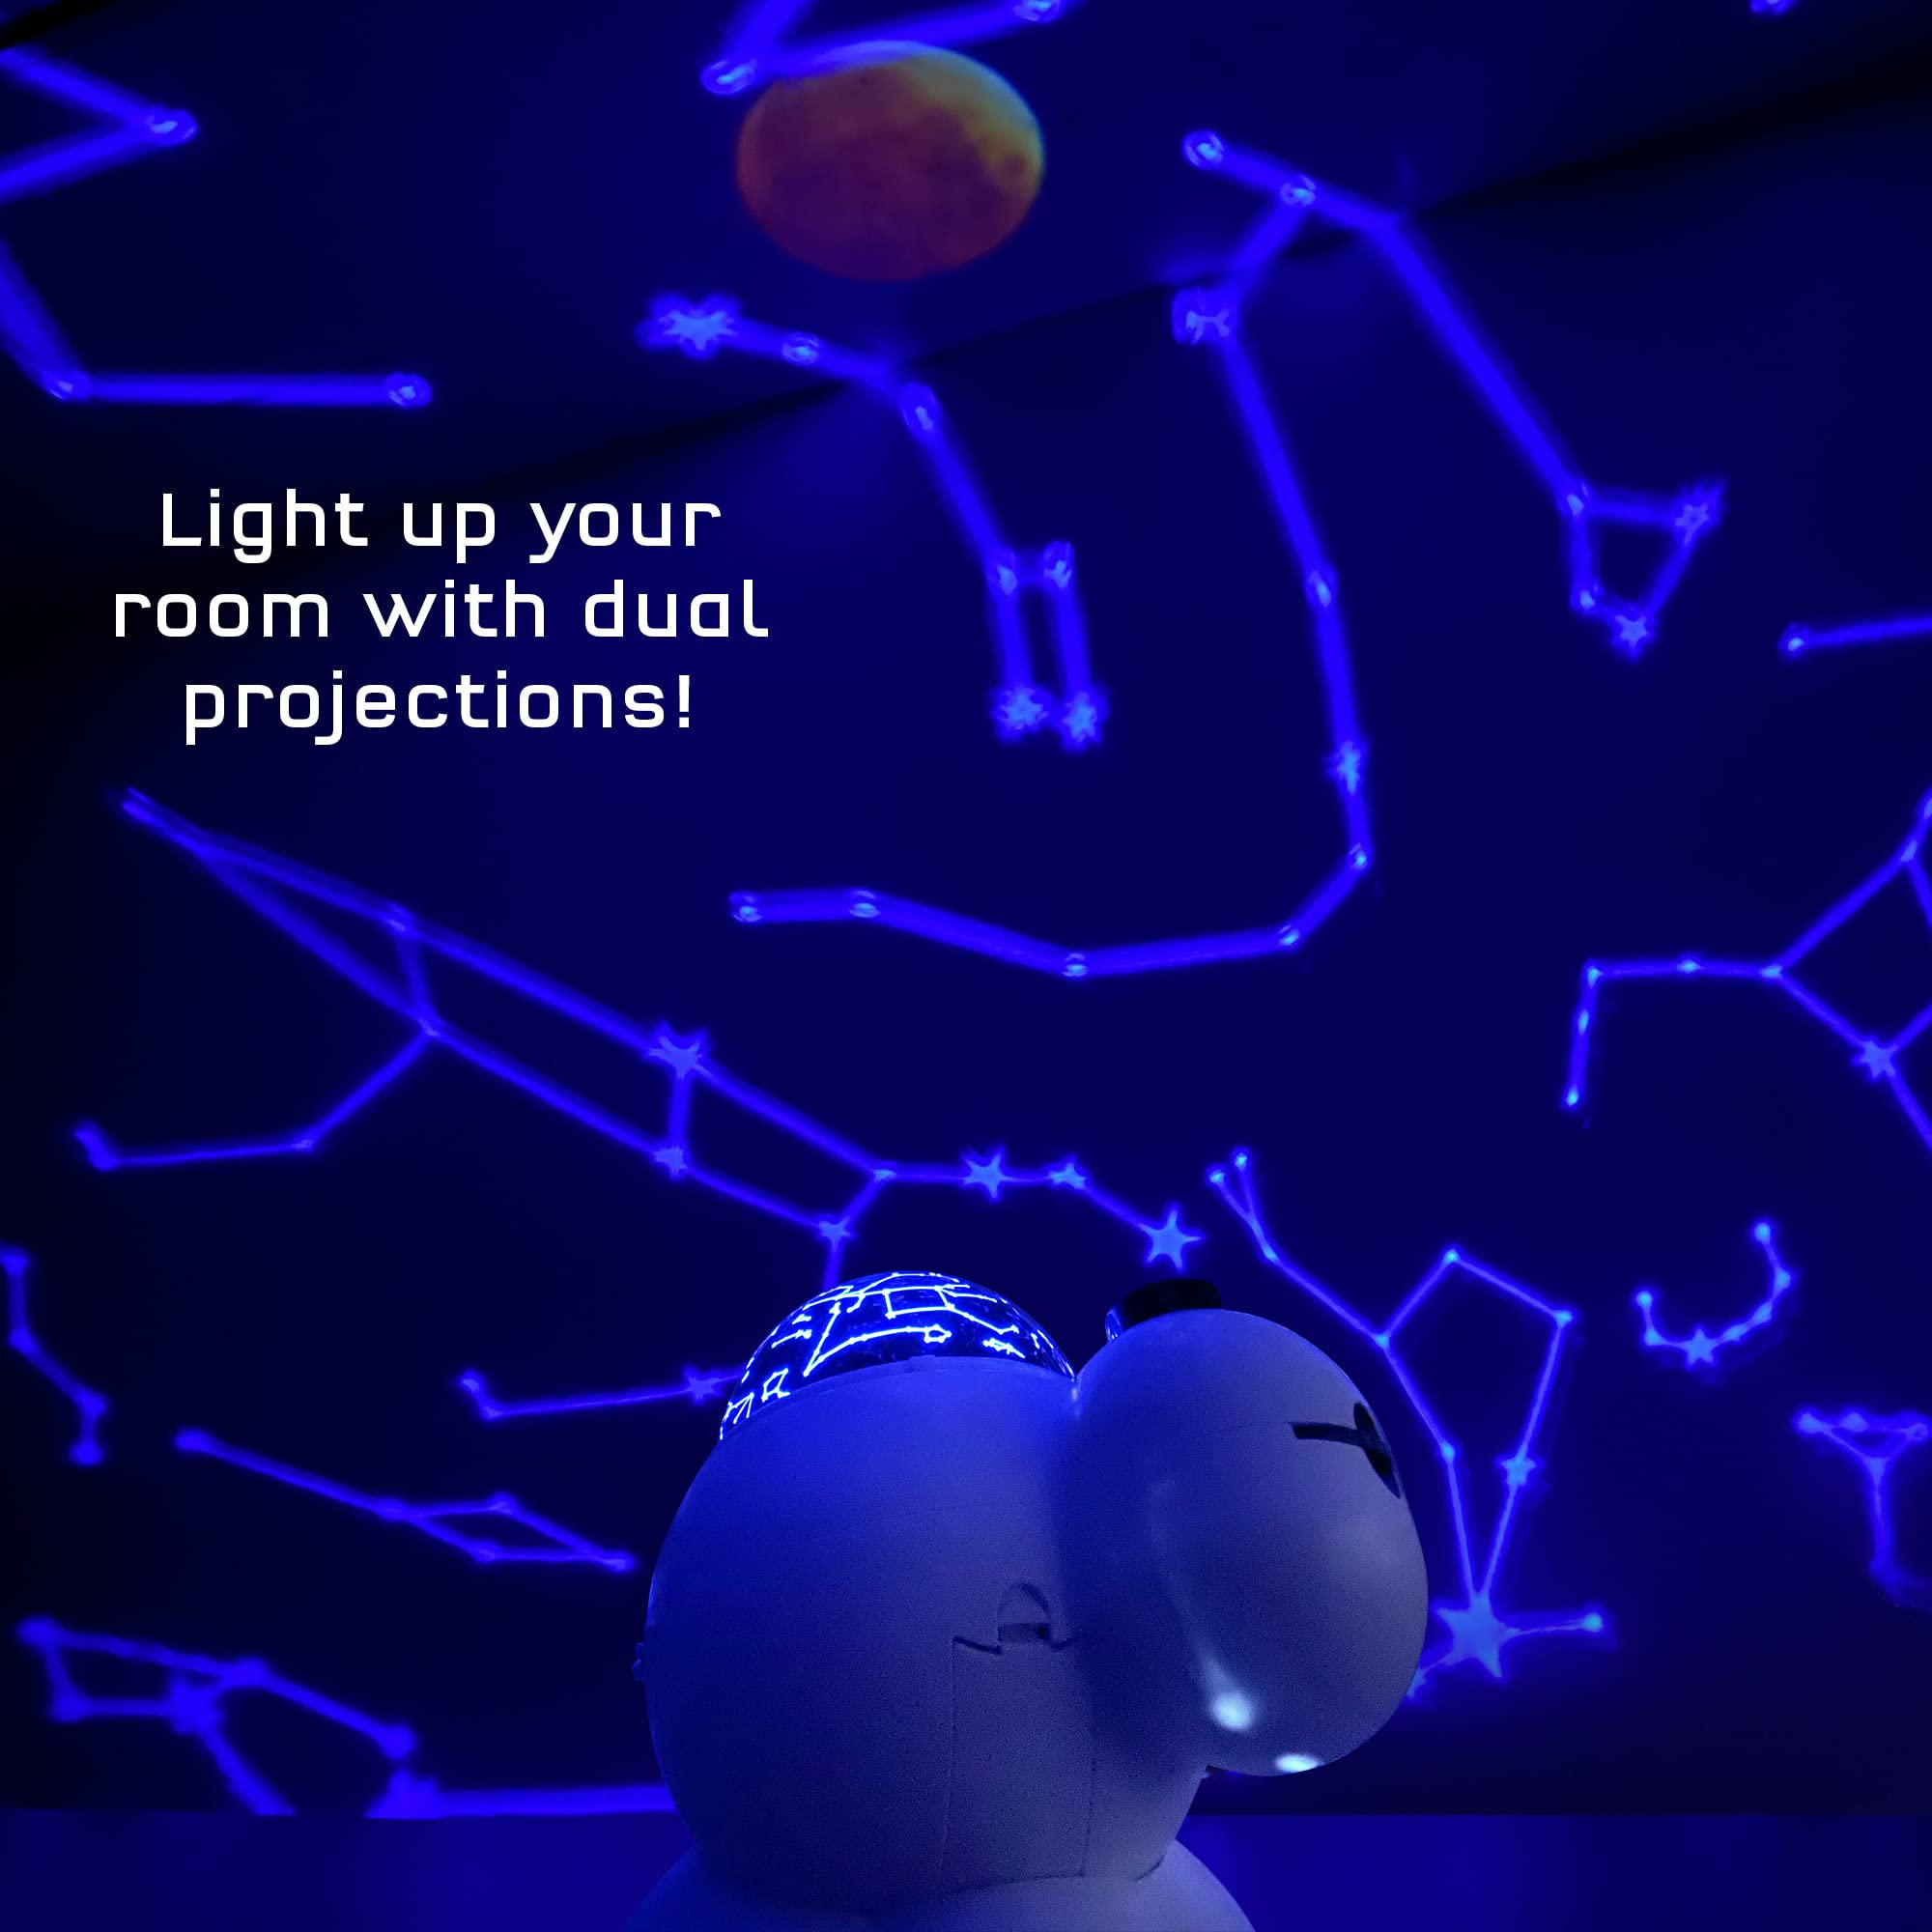 The Thames & Kosmos Planetarium Projector Essential STEM Tool | Illuminate Your Room as a Planetarium Theater | Dual Projector Casts Star Maps & Space-Themed Images from the James Webb Space Telescope